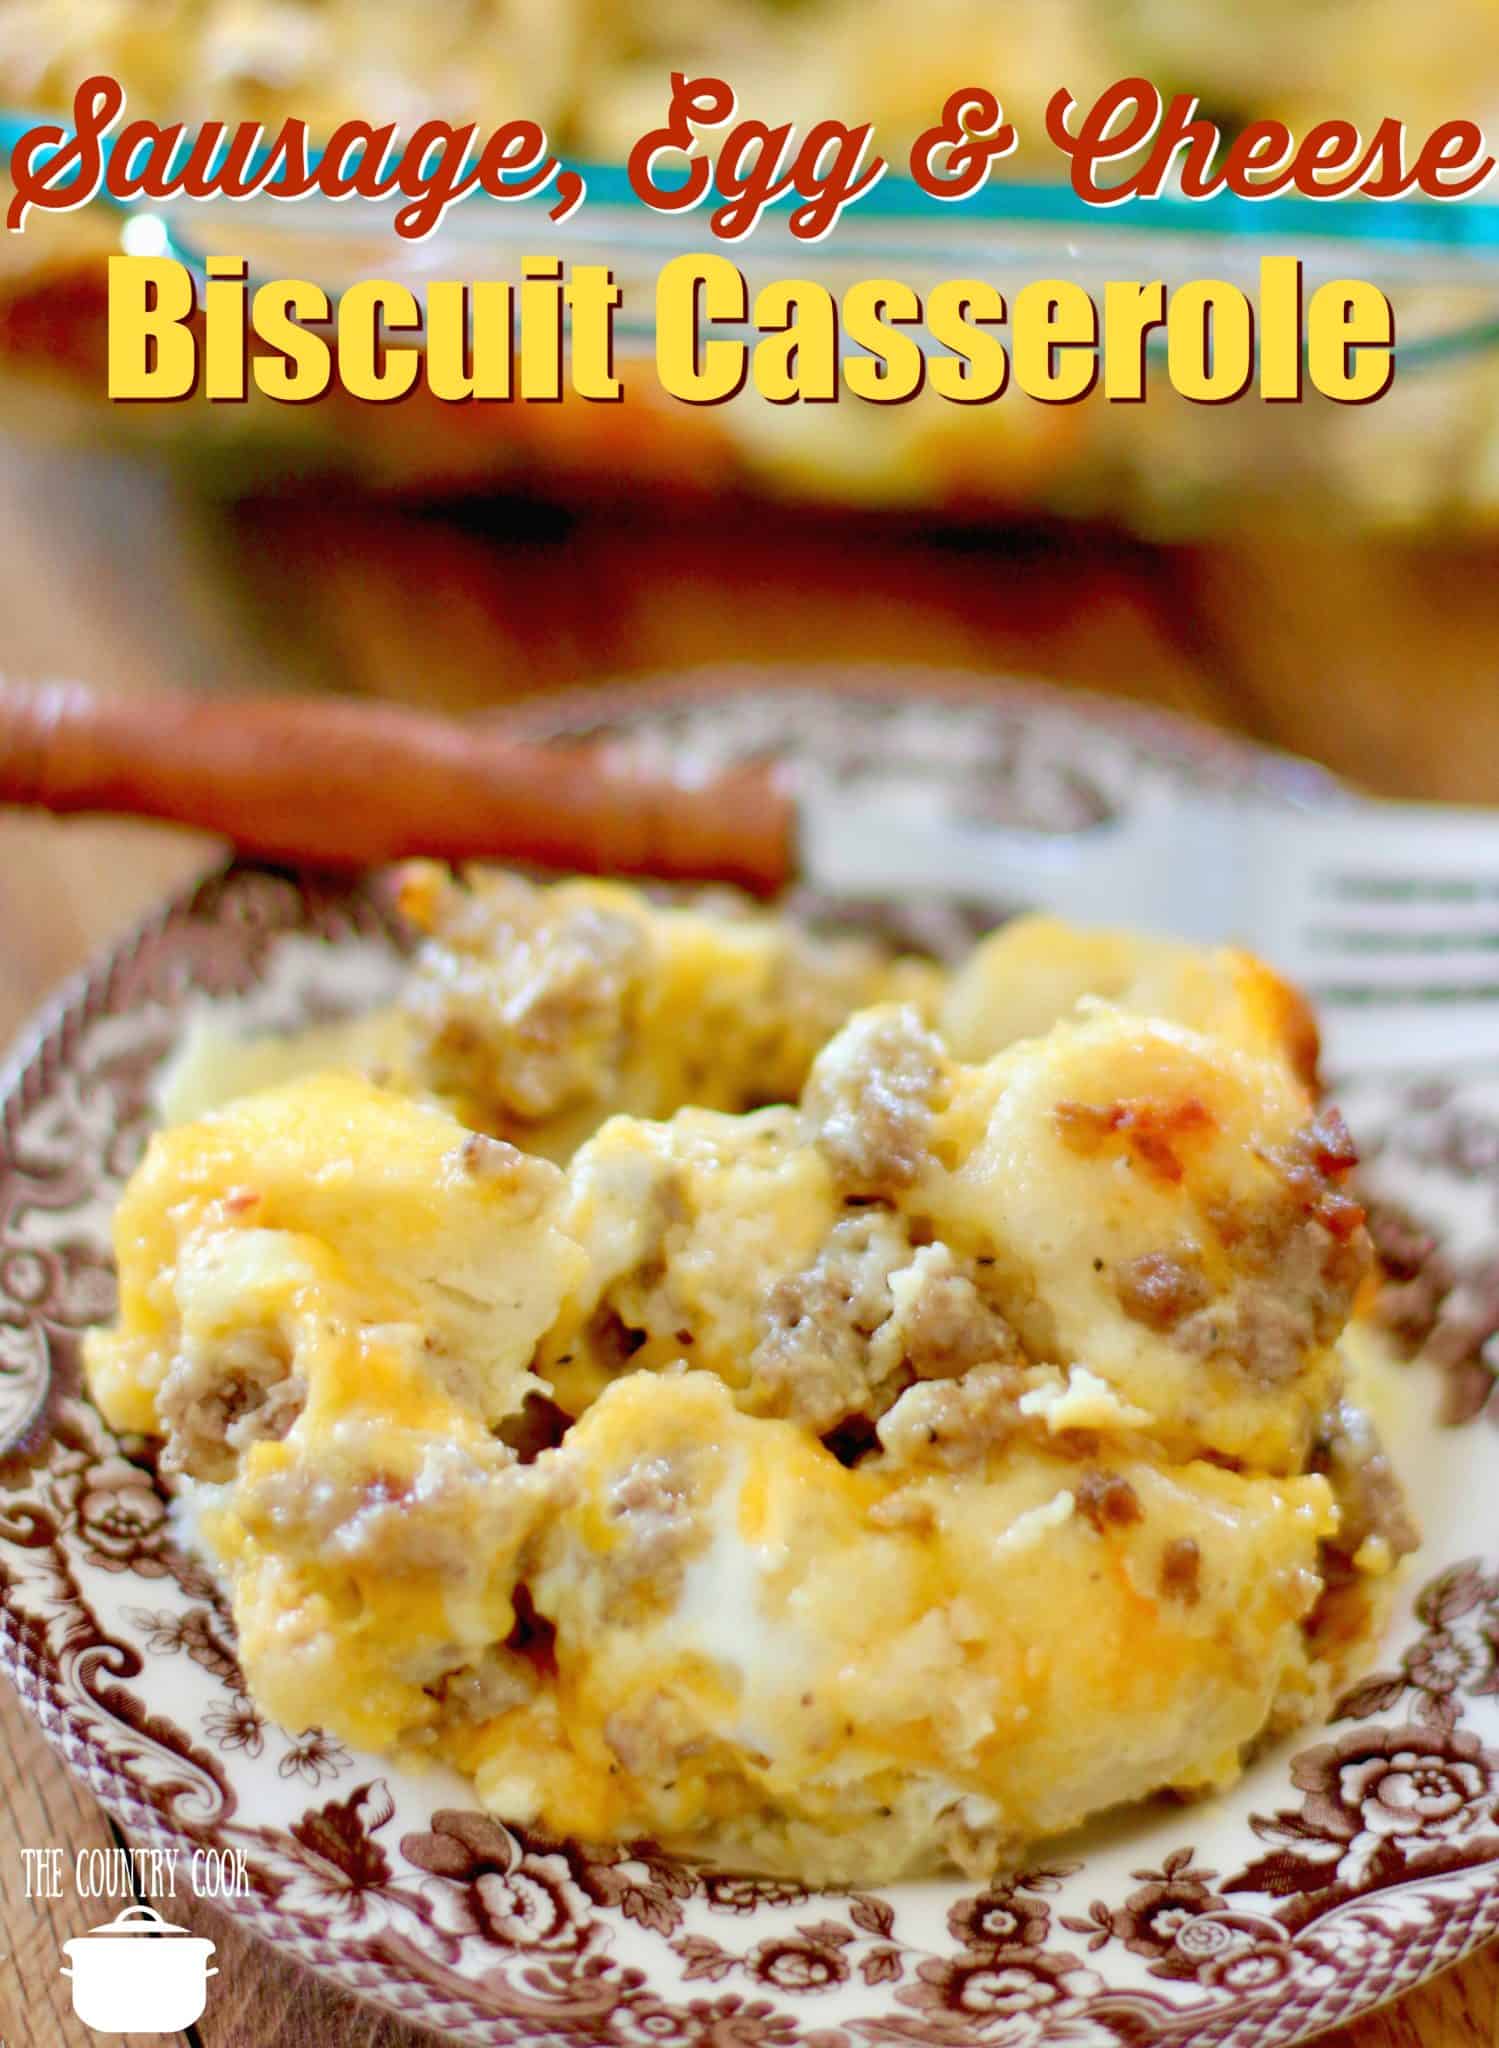 Sausage, Egg & Cheese Biscuit Breakfast Casserole recipe from The Country Cook. Slice shown on a brown and white plate with a fork in the background.